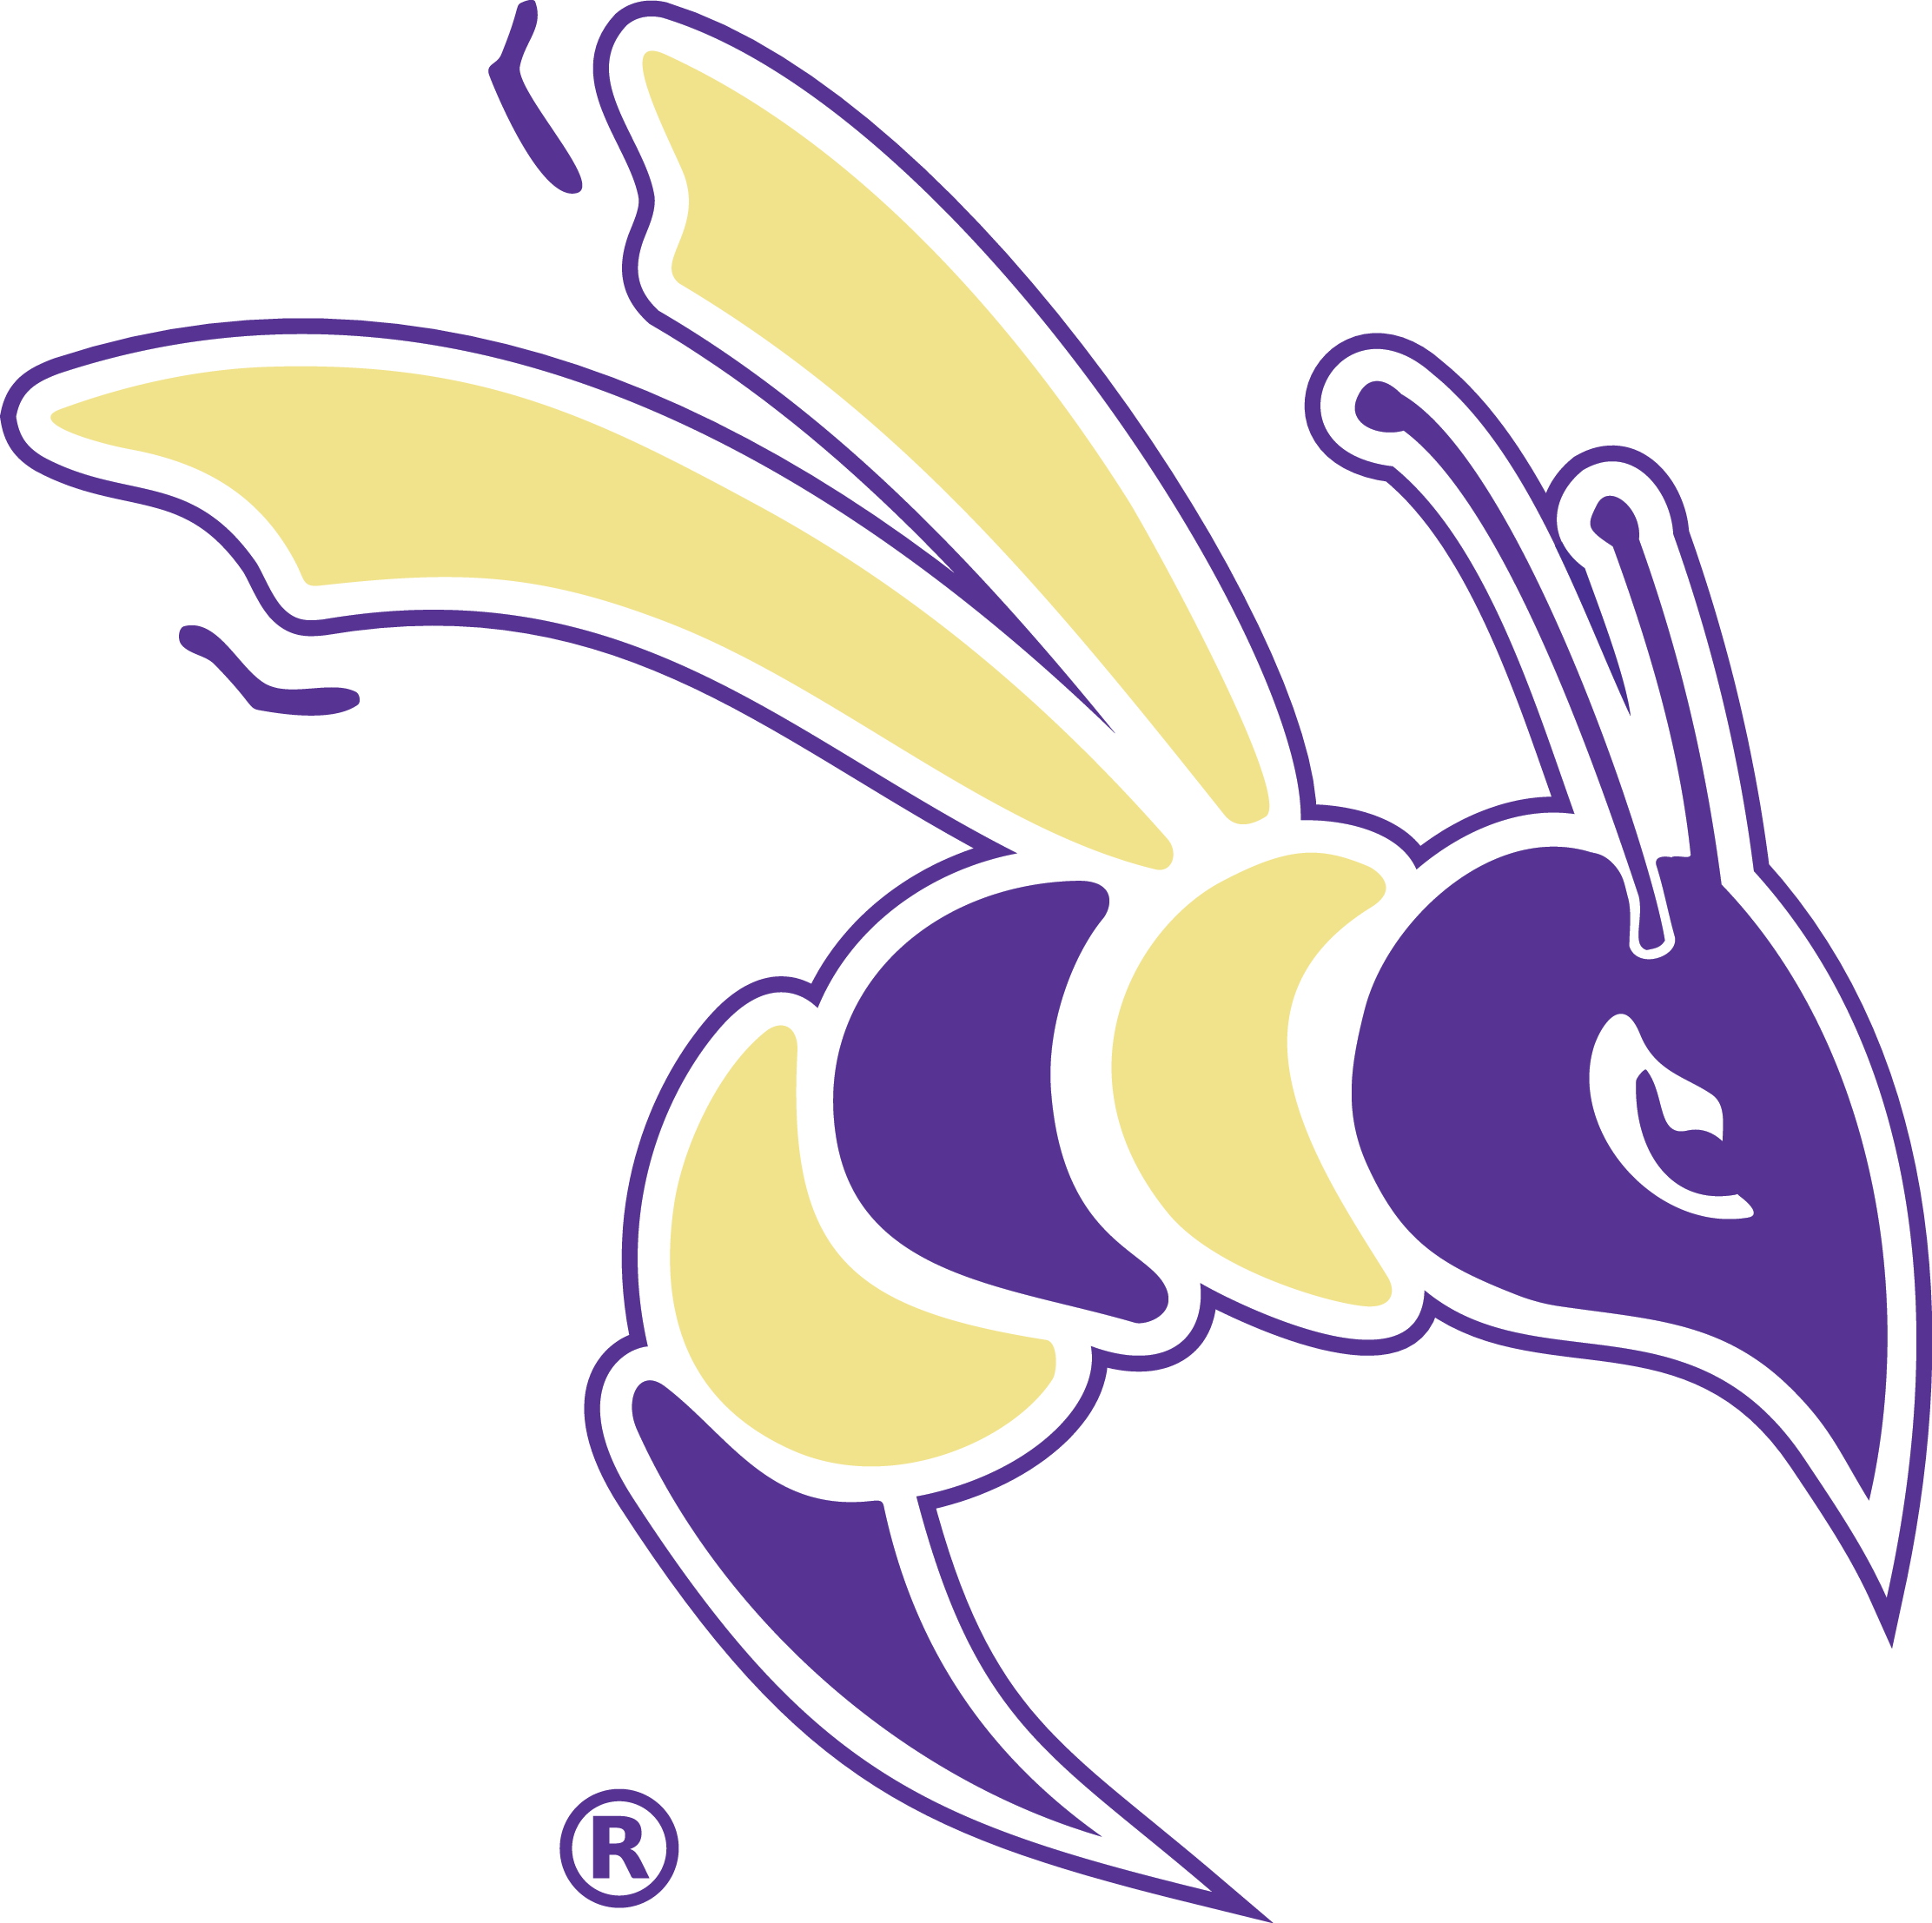 Defiance College Yellow Jacket mascot in purple and gold